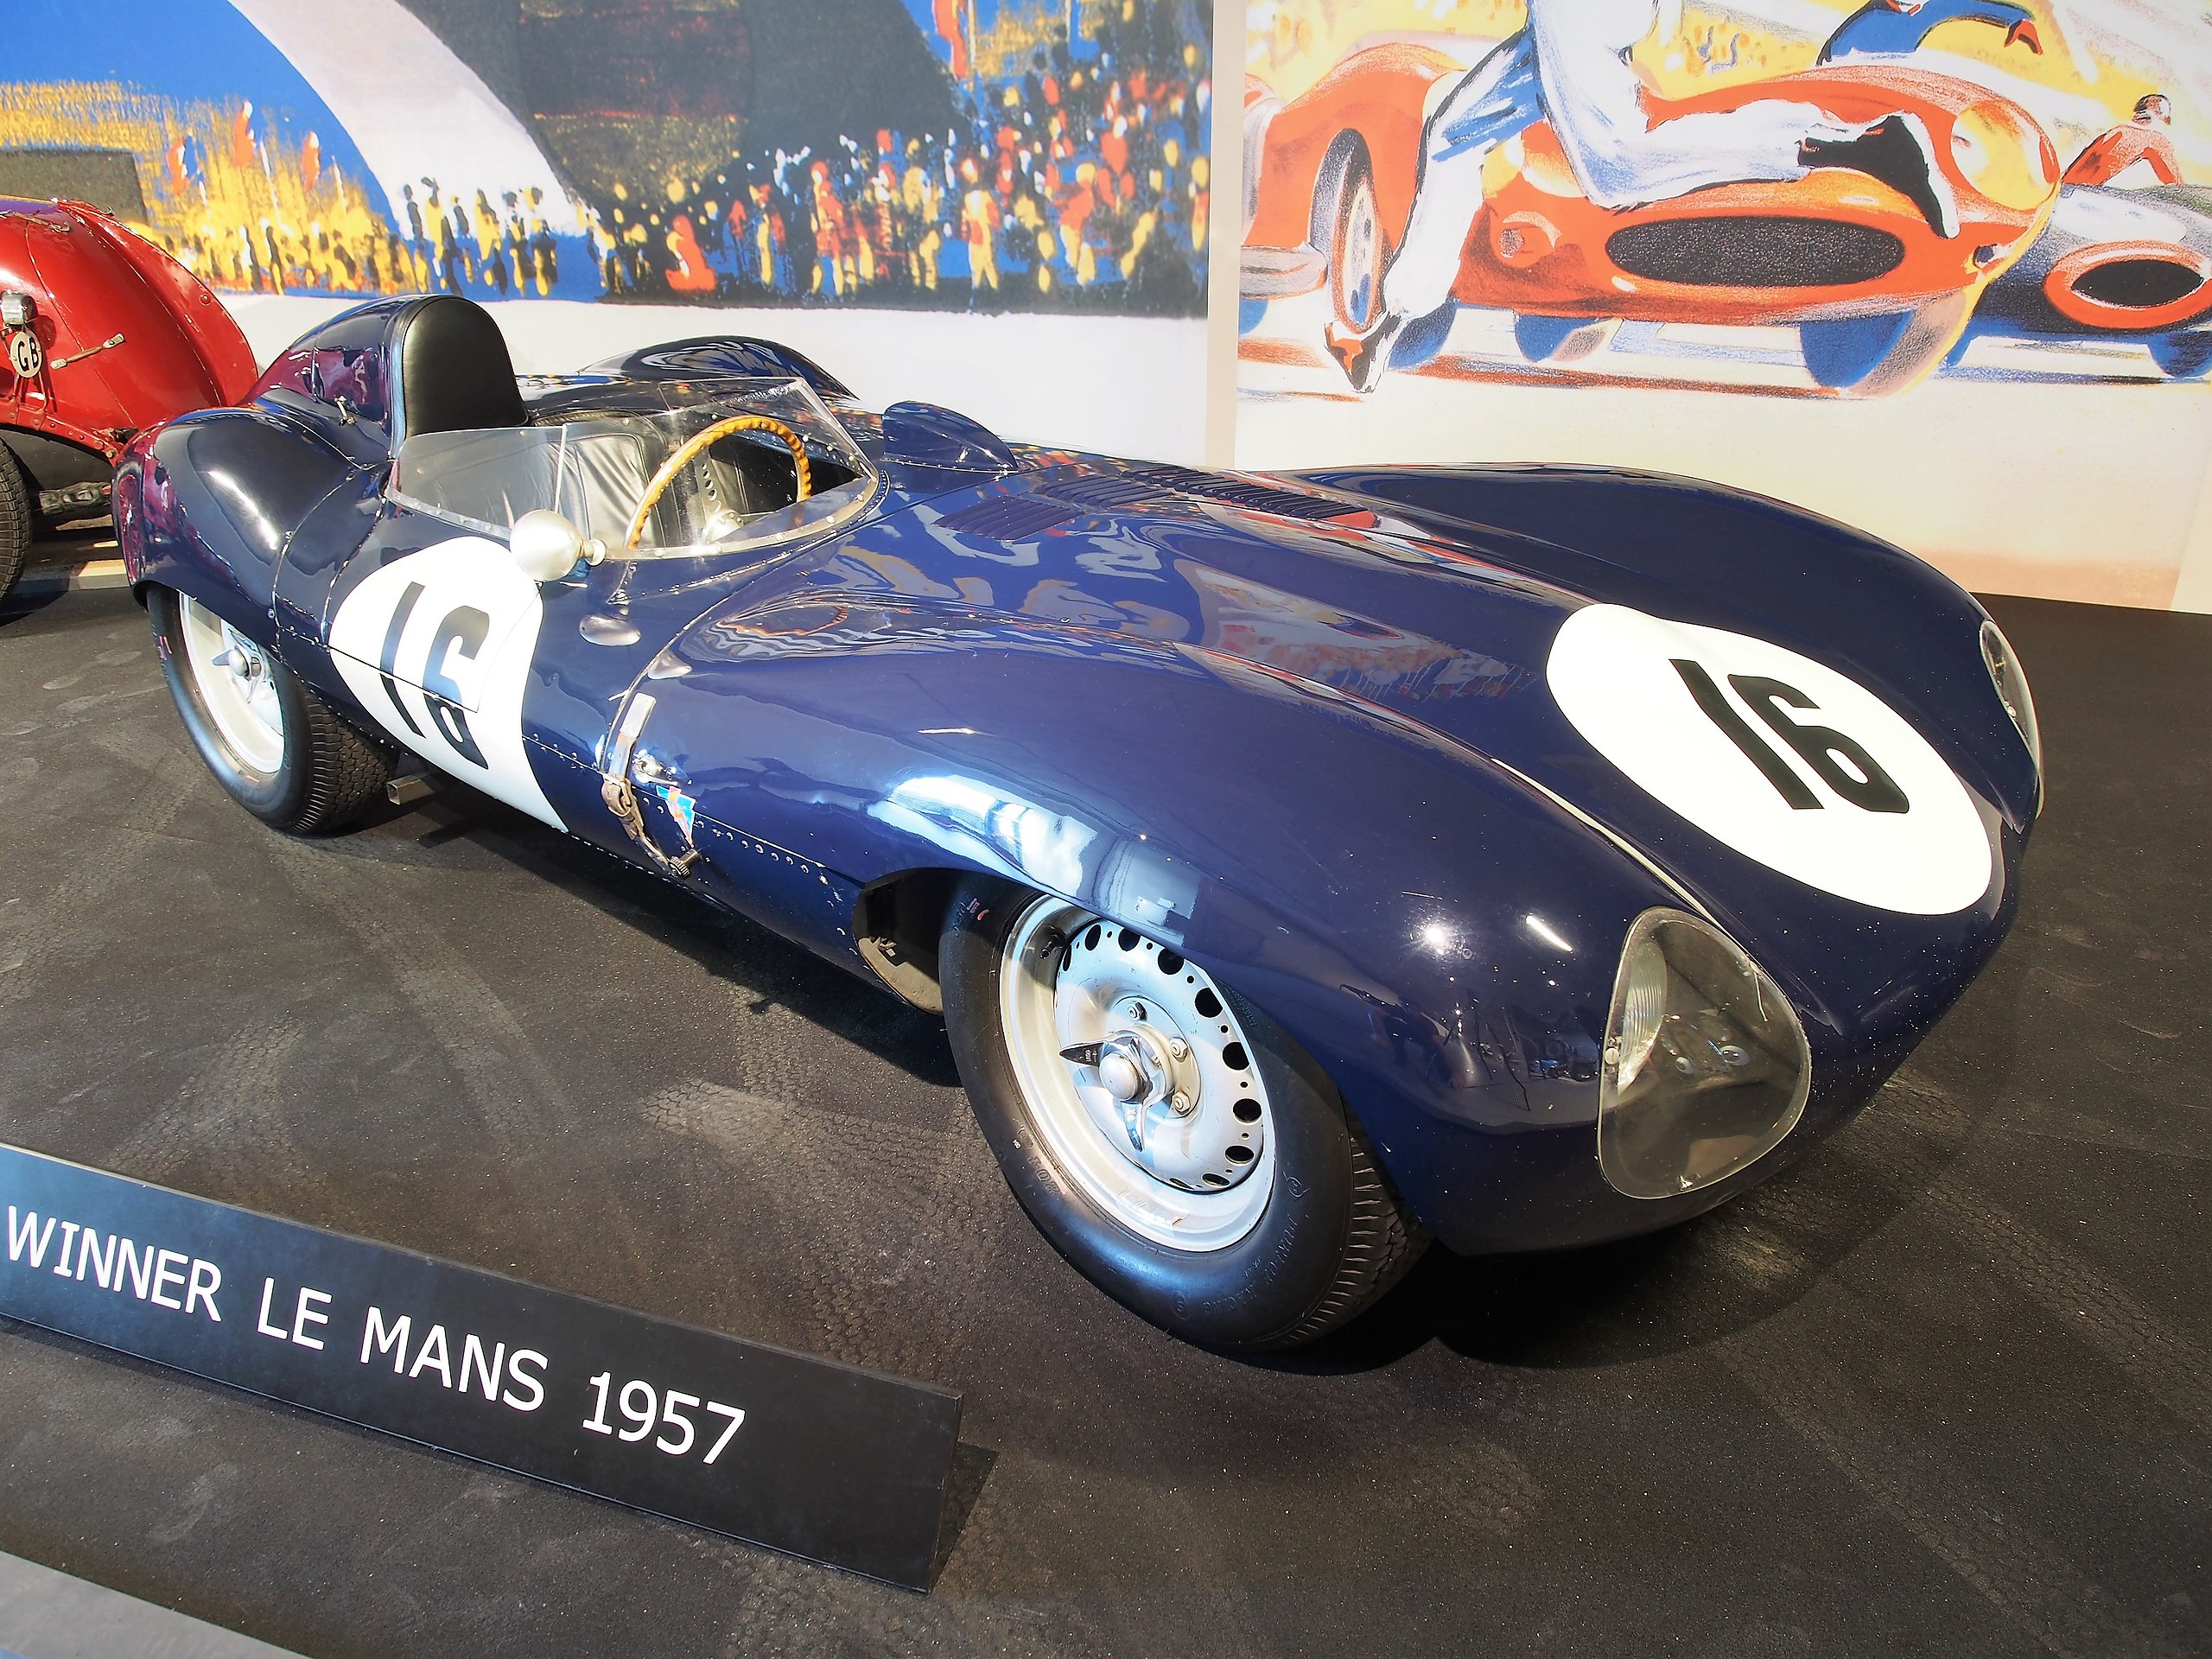 D-Type XKD606, winner of the 1957 Le Mans 24 Hours race, in Ecurie Ecosse metallic "flag blue" livery